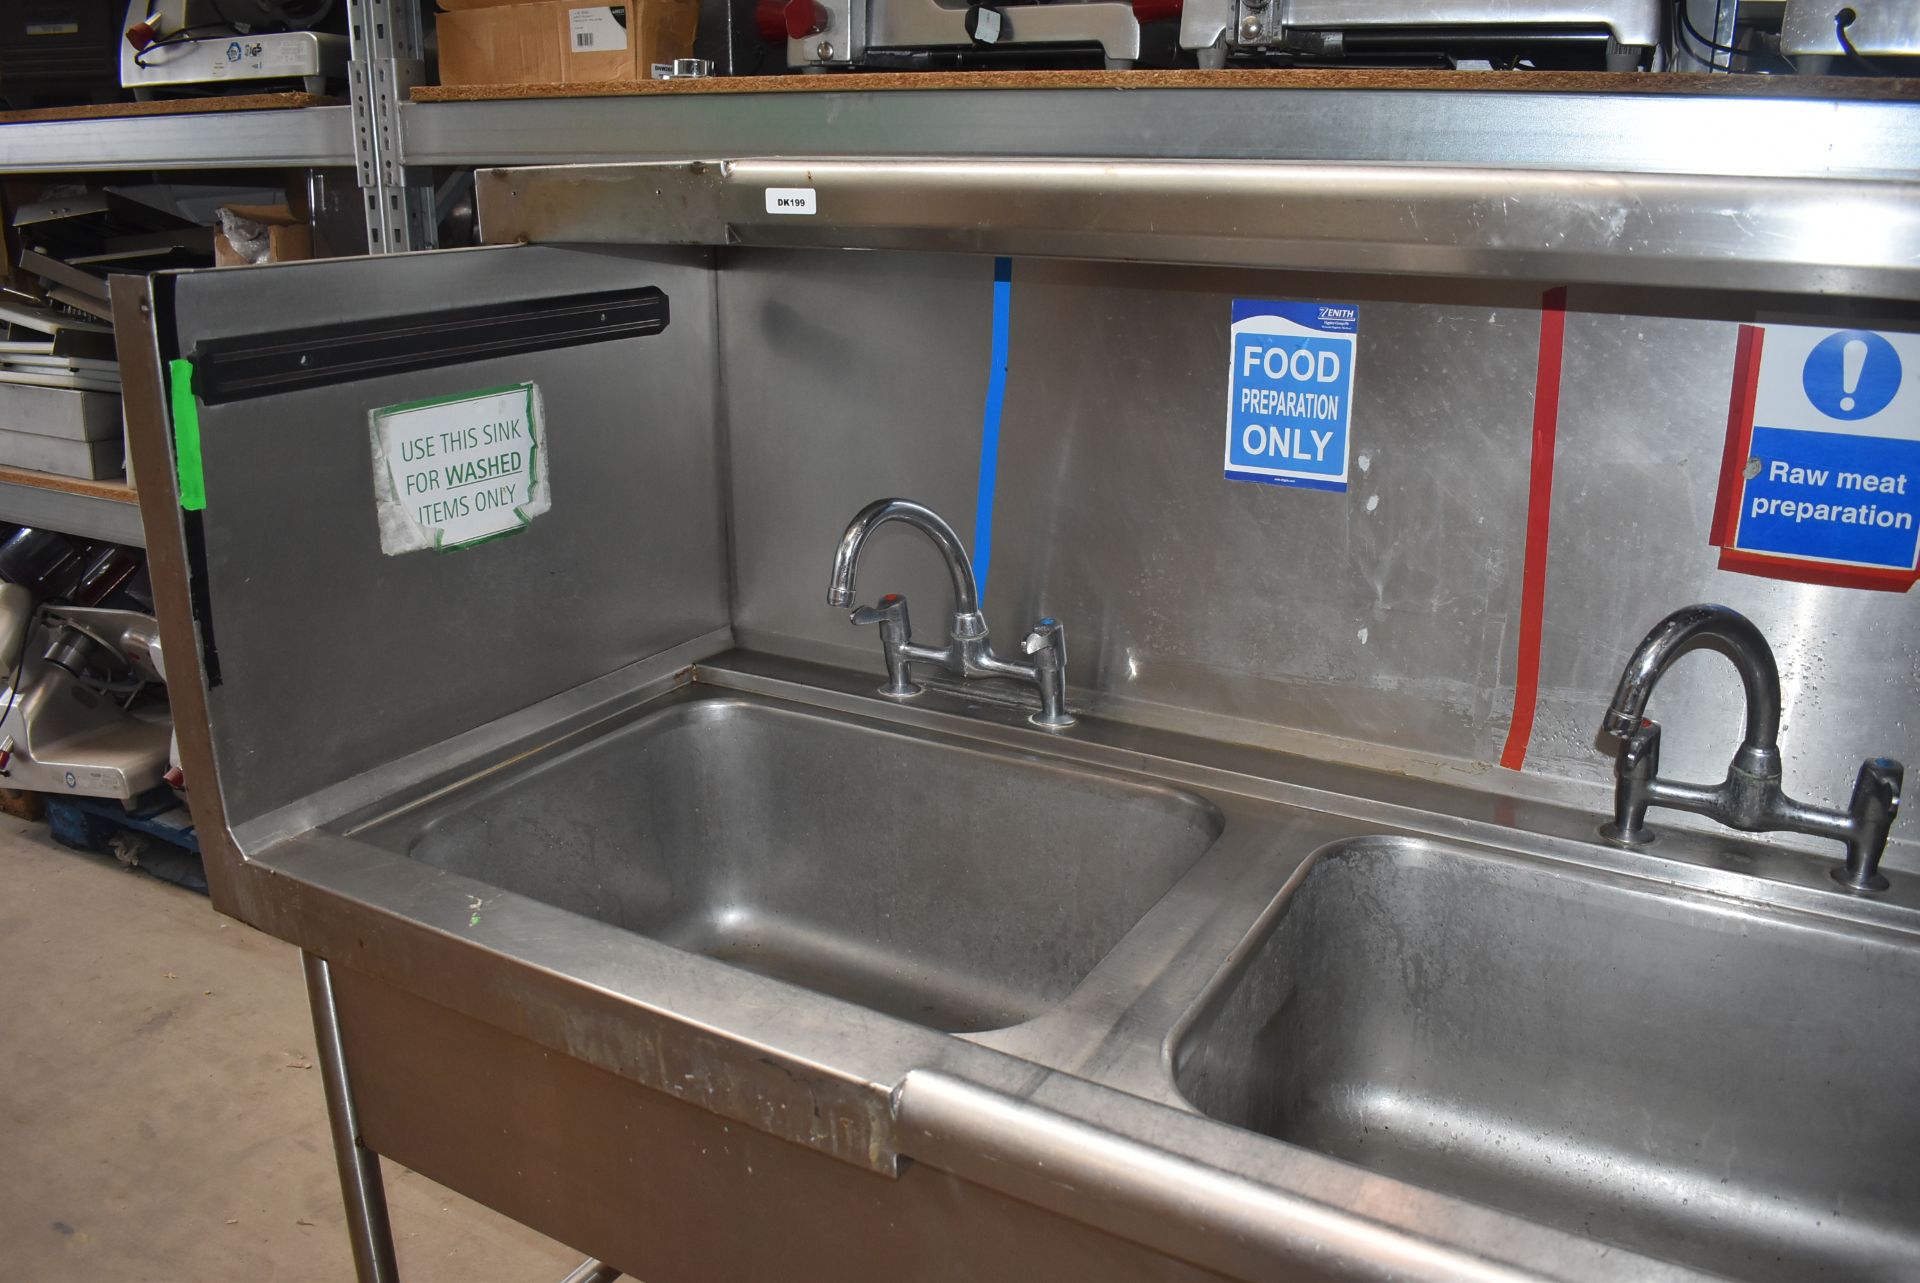 1 x Stainless Steel Twin Sink Wash Unit With Mixer Taps and Splash Back Surround - Width: 125 cms - Image 3 of 11